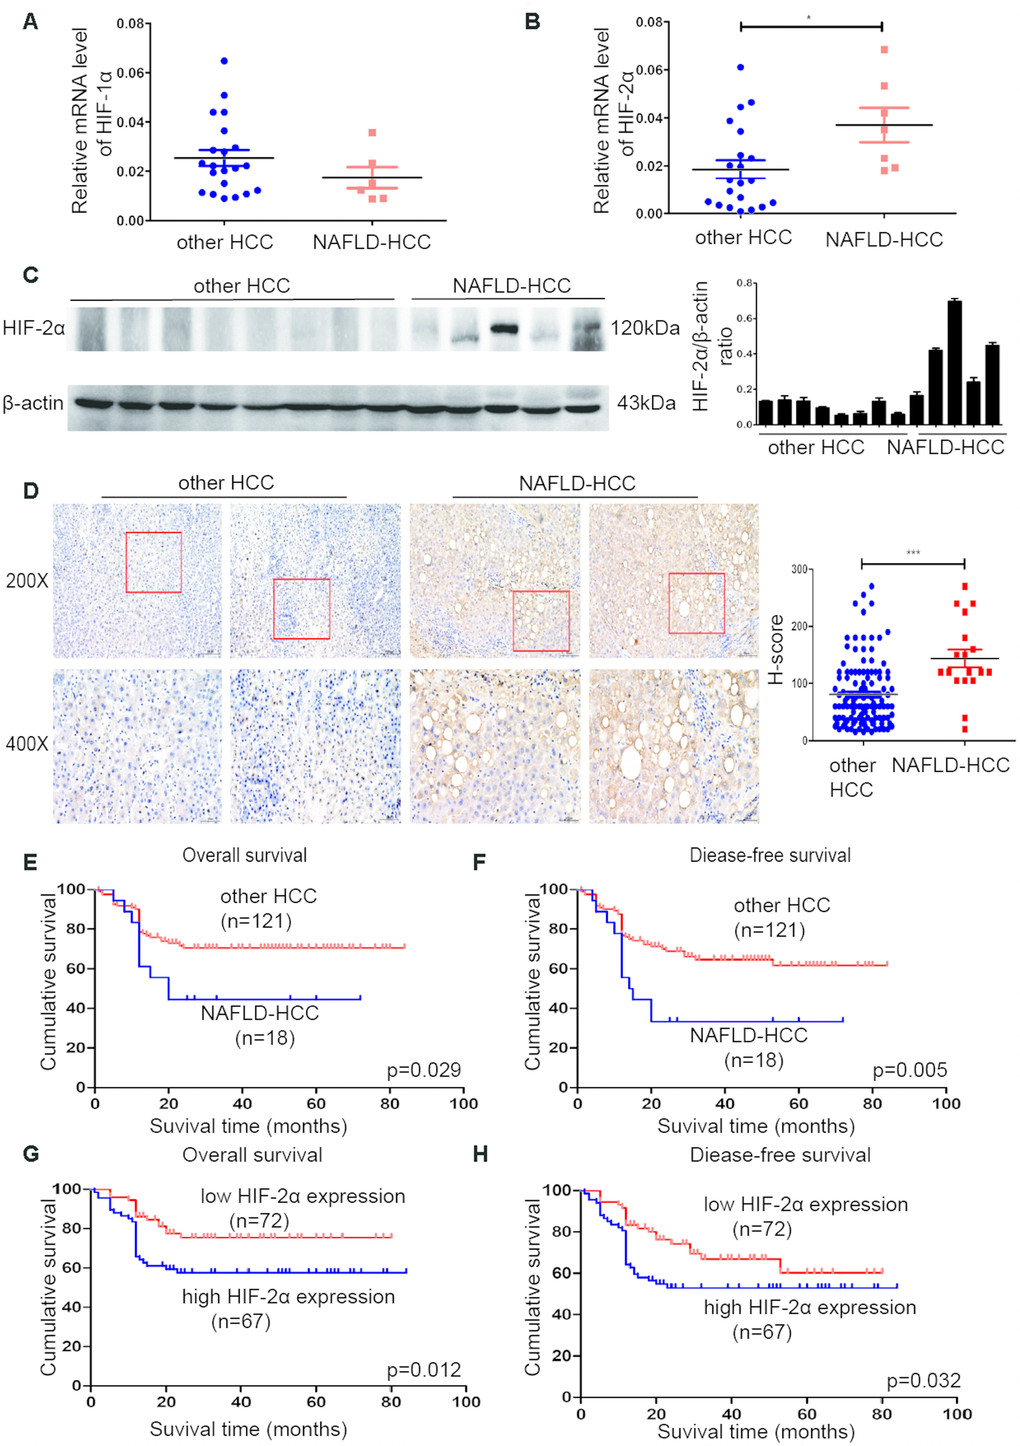 HIF-2α was upregulated in NAFLD-HCC patients and correlated with poor survival. (A, B) Quantitative RT-PCR assessment of HIF-1α and HIF-2α expression in tissues from NAFLD-HCC patients (n=7) and other HCC patients (n=21). Transcription levels were normalized to those of β-actin. (C). Western blot analysis of HIF-2α expression in the patients’ tissues. β-Actin was used as the loading control. Densitometric analyses of the band intensity ratios for HIF-2α/β-actin. (D) IHC determination of HIF-2α expression in tissues from HCC and NAFLD-HCC patients (magnification: 200X, 400X). H score between NAFLD-HCC and HCC (E, F) Survival curves of 139 patients with HCC and NAFLD-HCC. (G, H) Survival curves of 139 patients stratified according to HIF-2α protein expression.